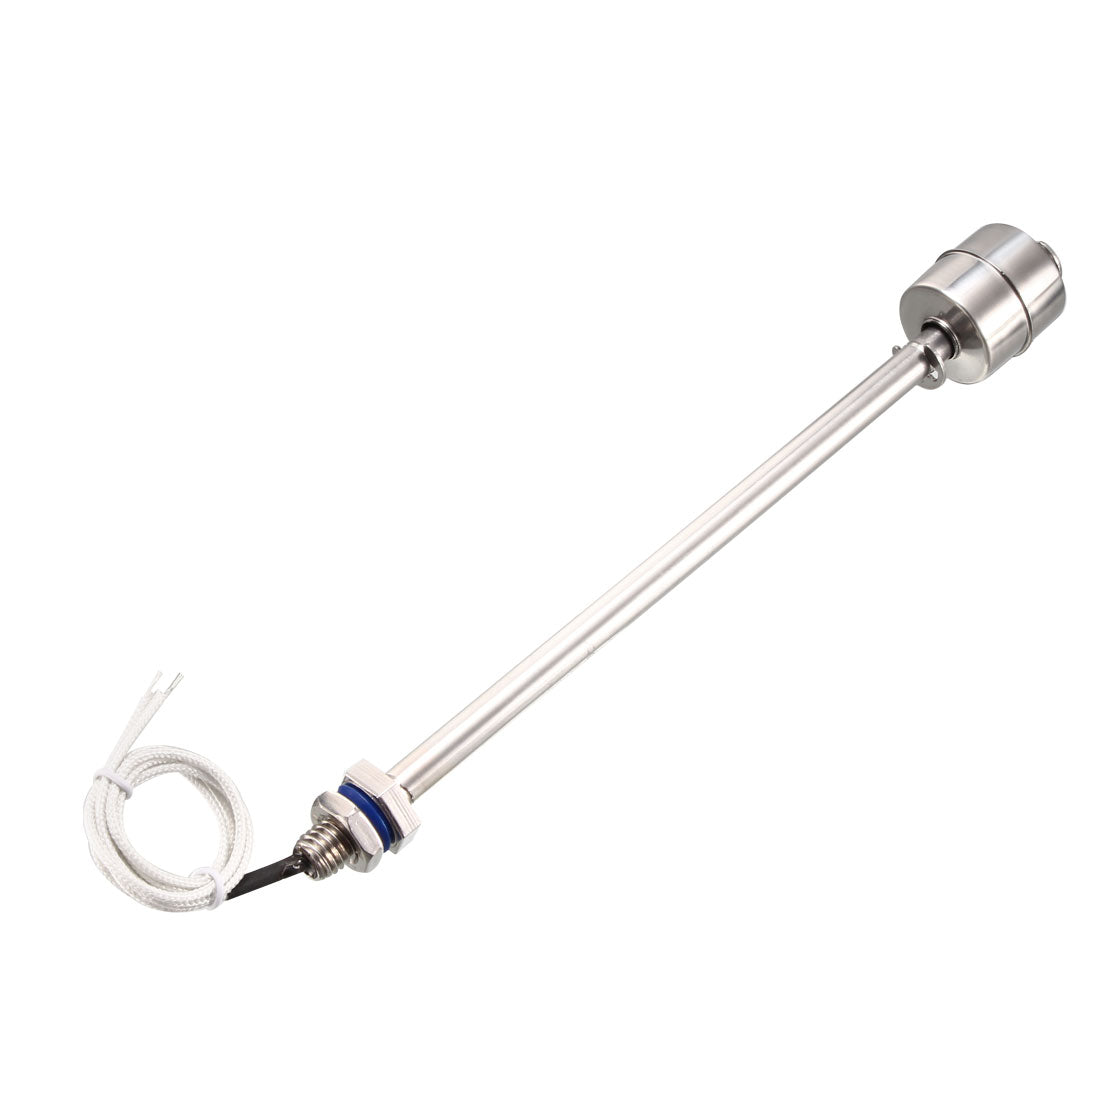 uxcell Uxcell Stainless Steel Float Switch M10 215mm Fish Tank Vertical Liquid Water Level Sensor